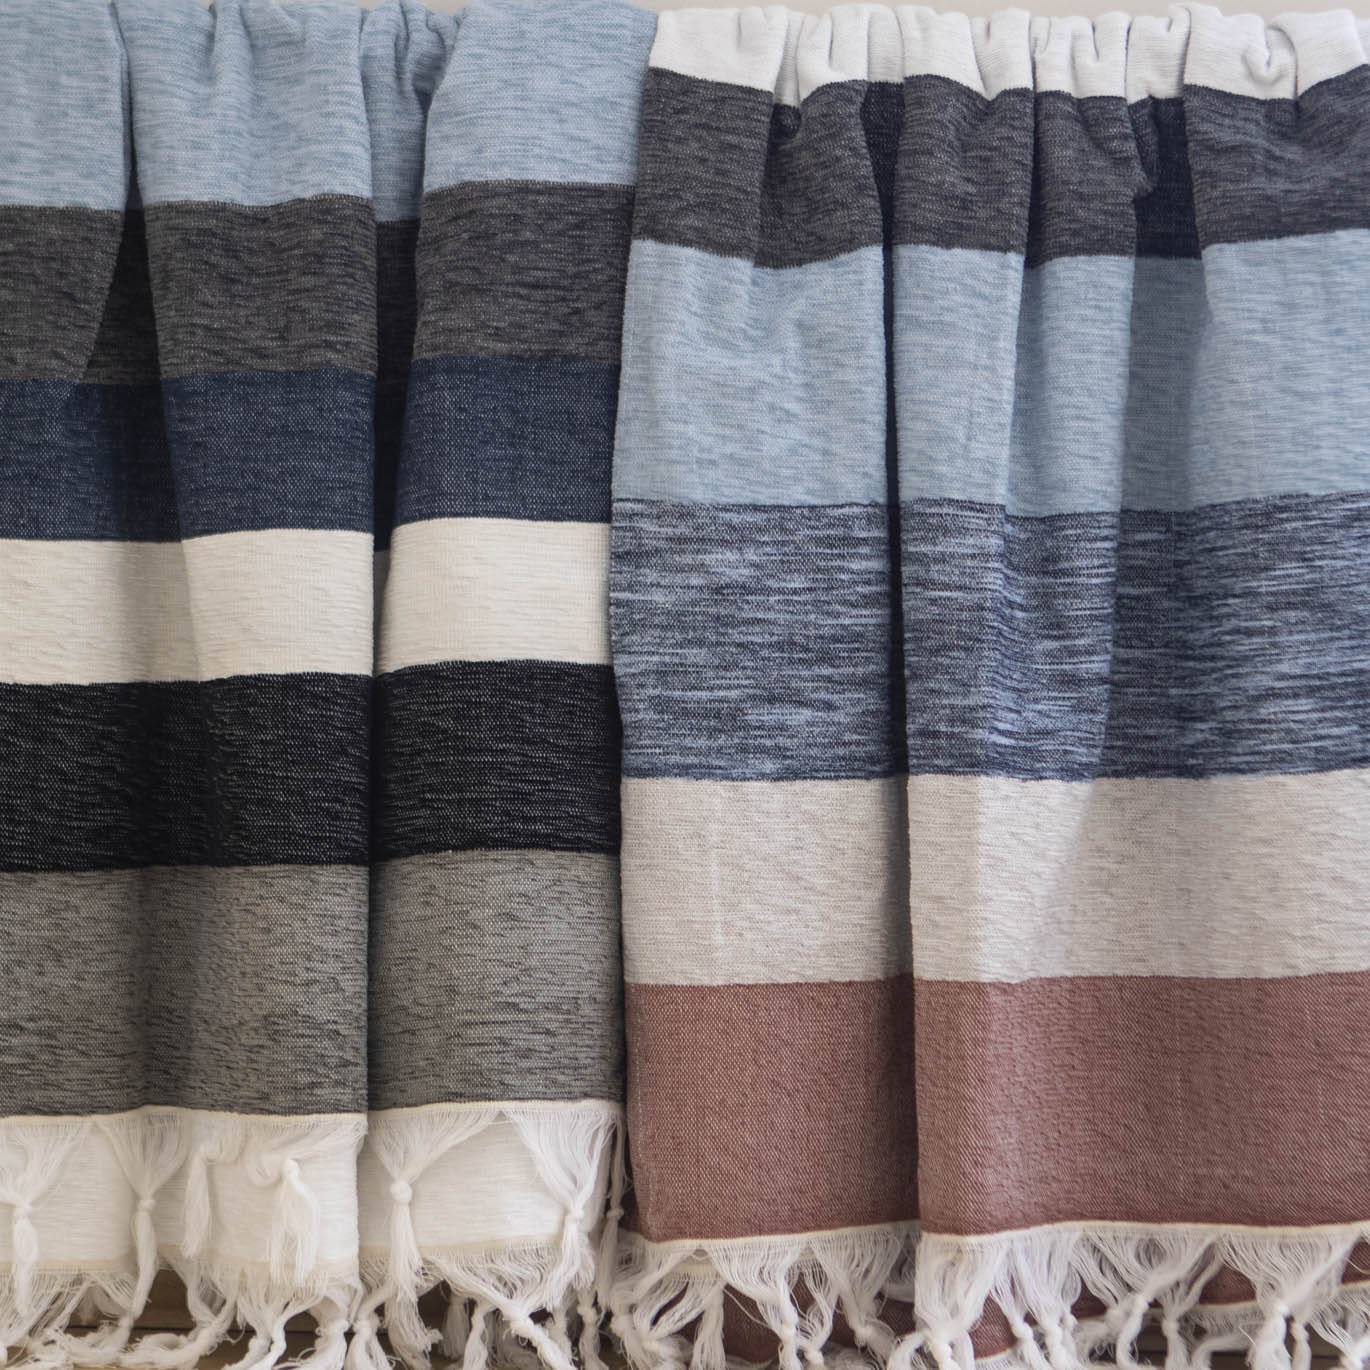 Hand-Woven Blanket - Cool Breeze - Near East Imports